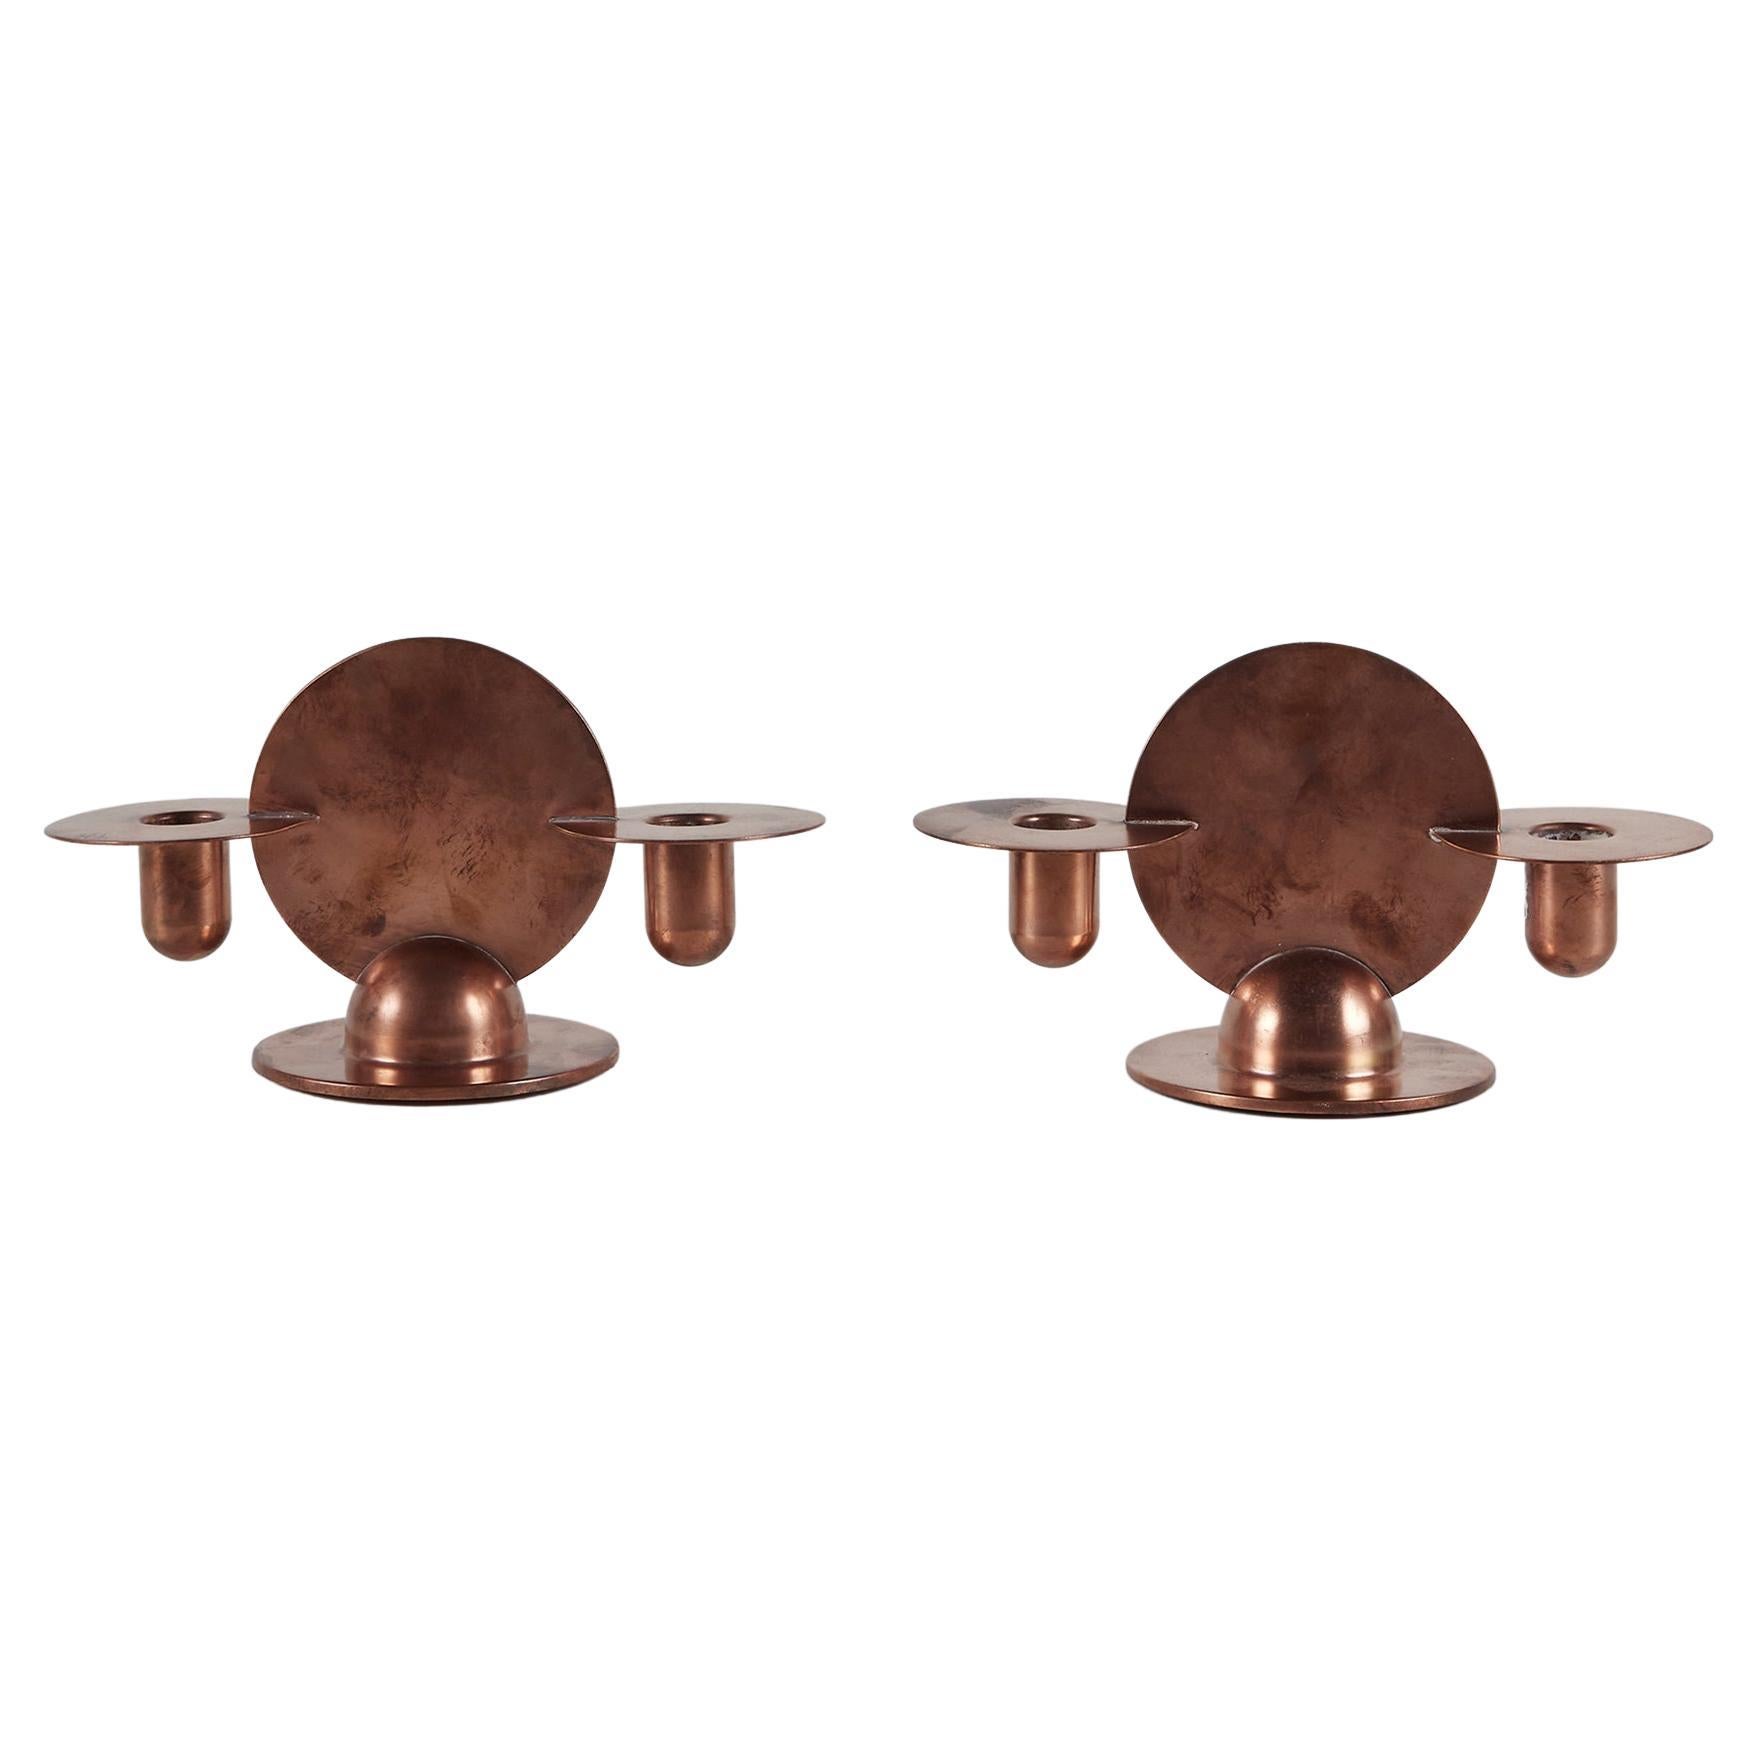 Pair of Copper Candlestick Holders by Walter von Nessen for Chase For Sale